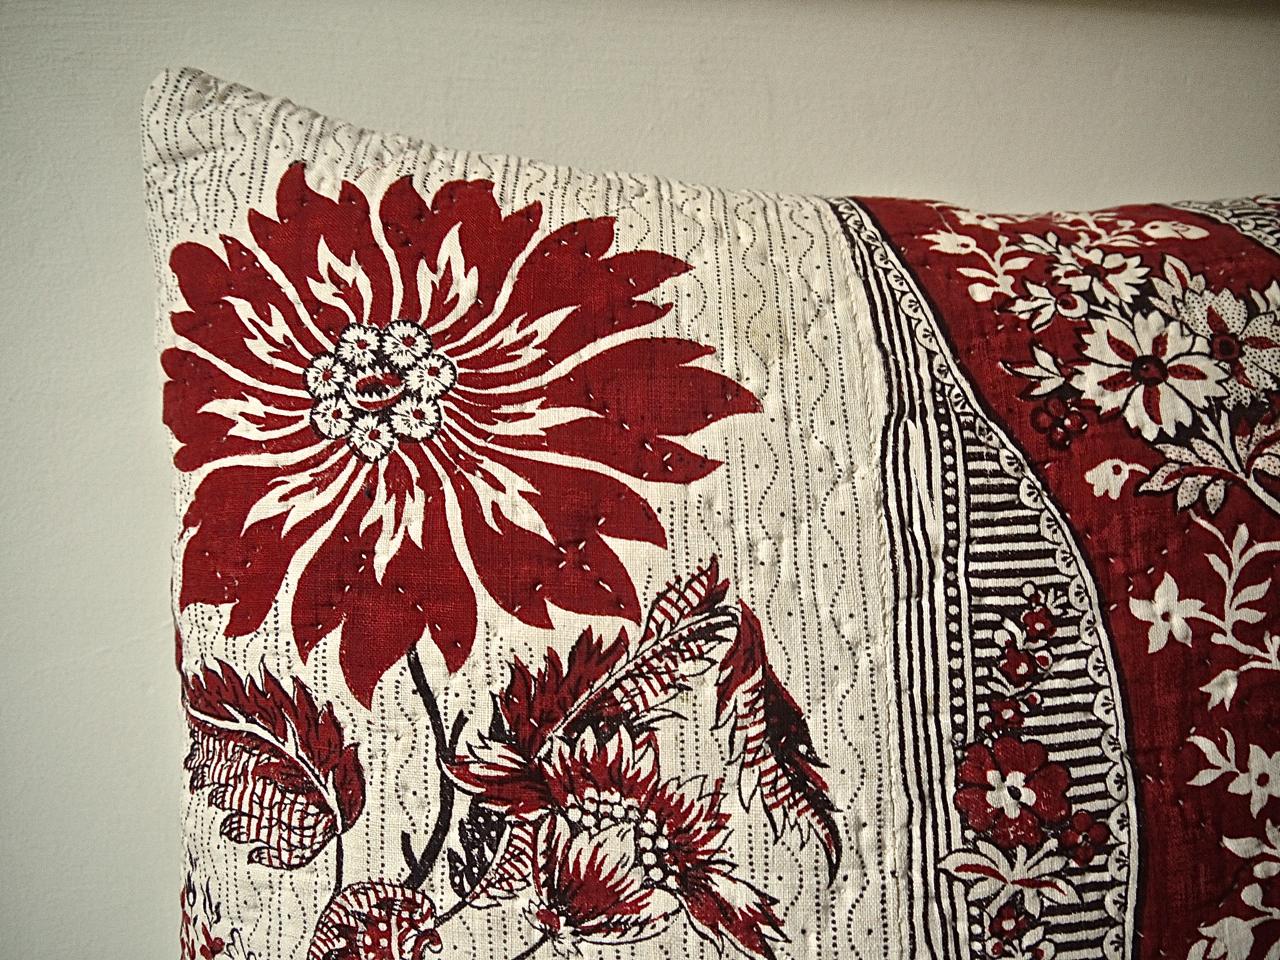 French circa 1790s block printed and quilted cotton cushion with a large-scale stylized floral and a patterned band design. A toile from Nantes or perhaps Beautiran. Fantastic crimson color contrasting with a soft white ground with a simple. Backed